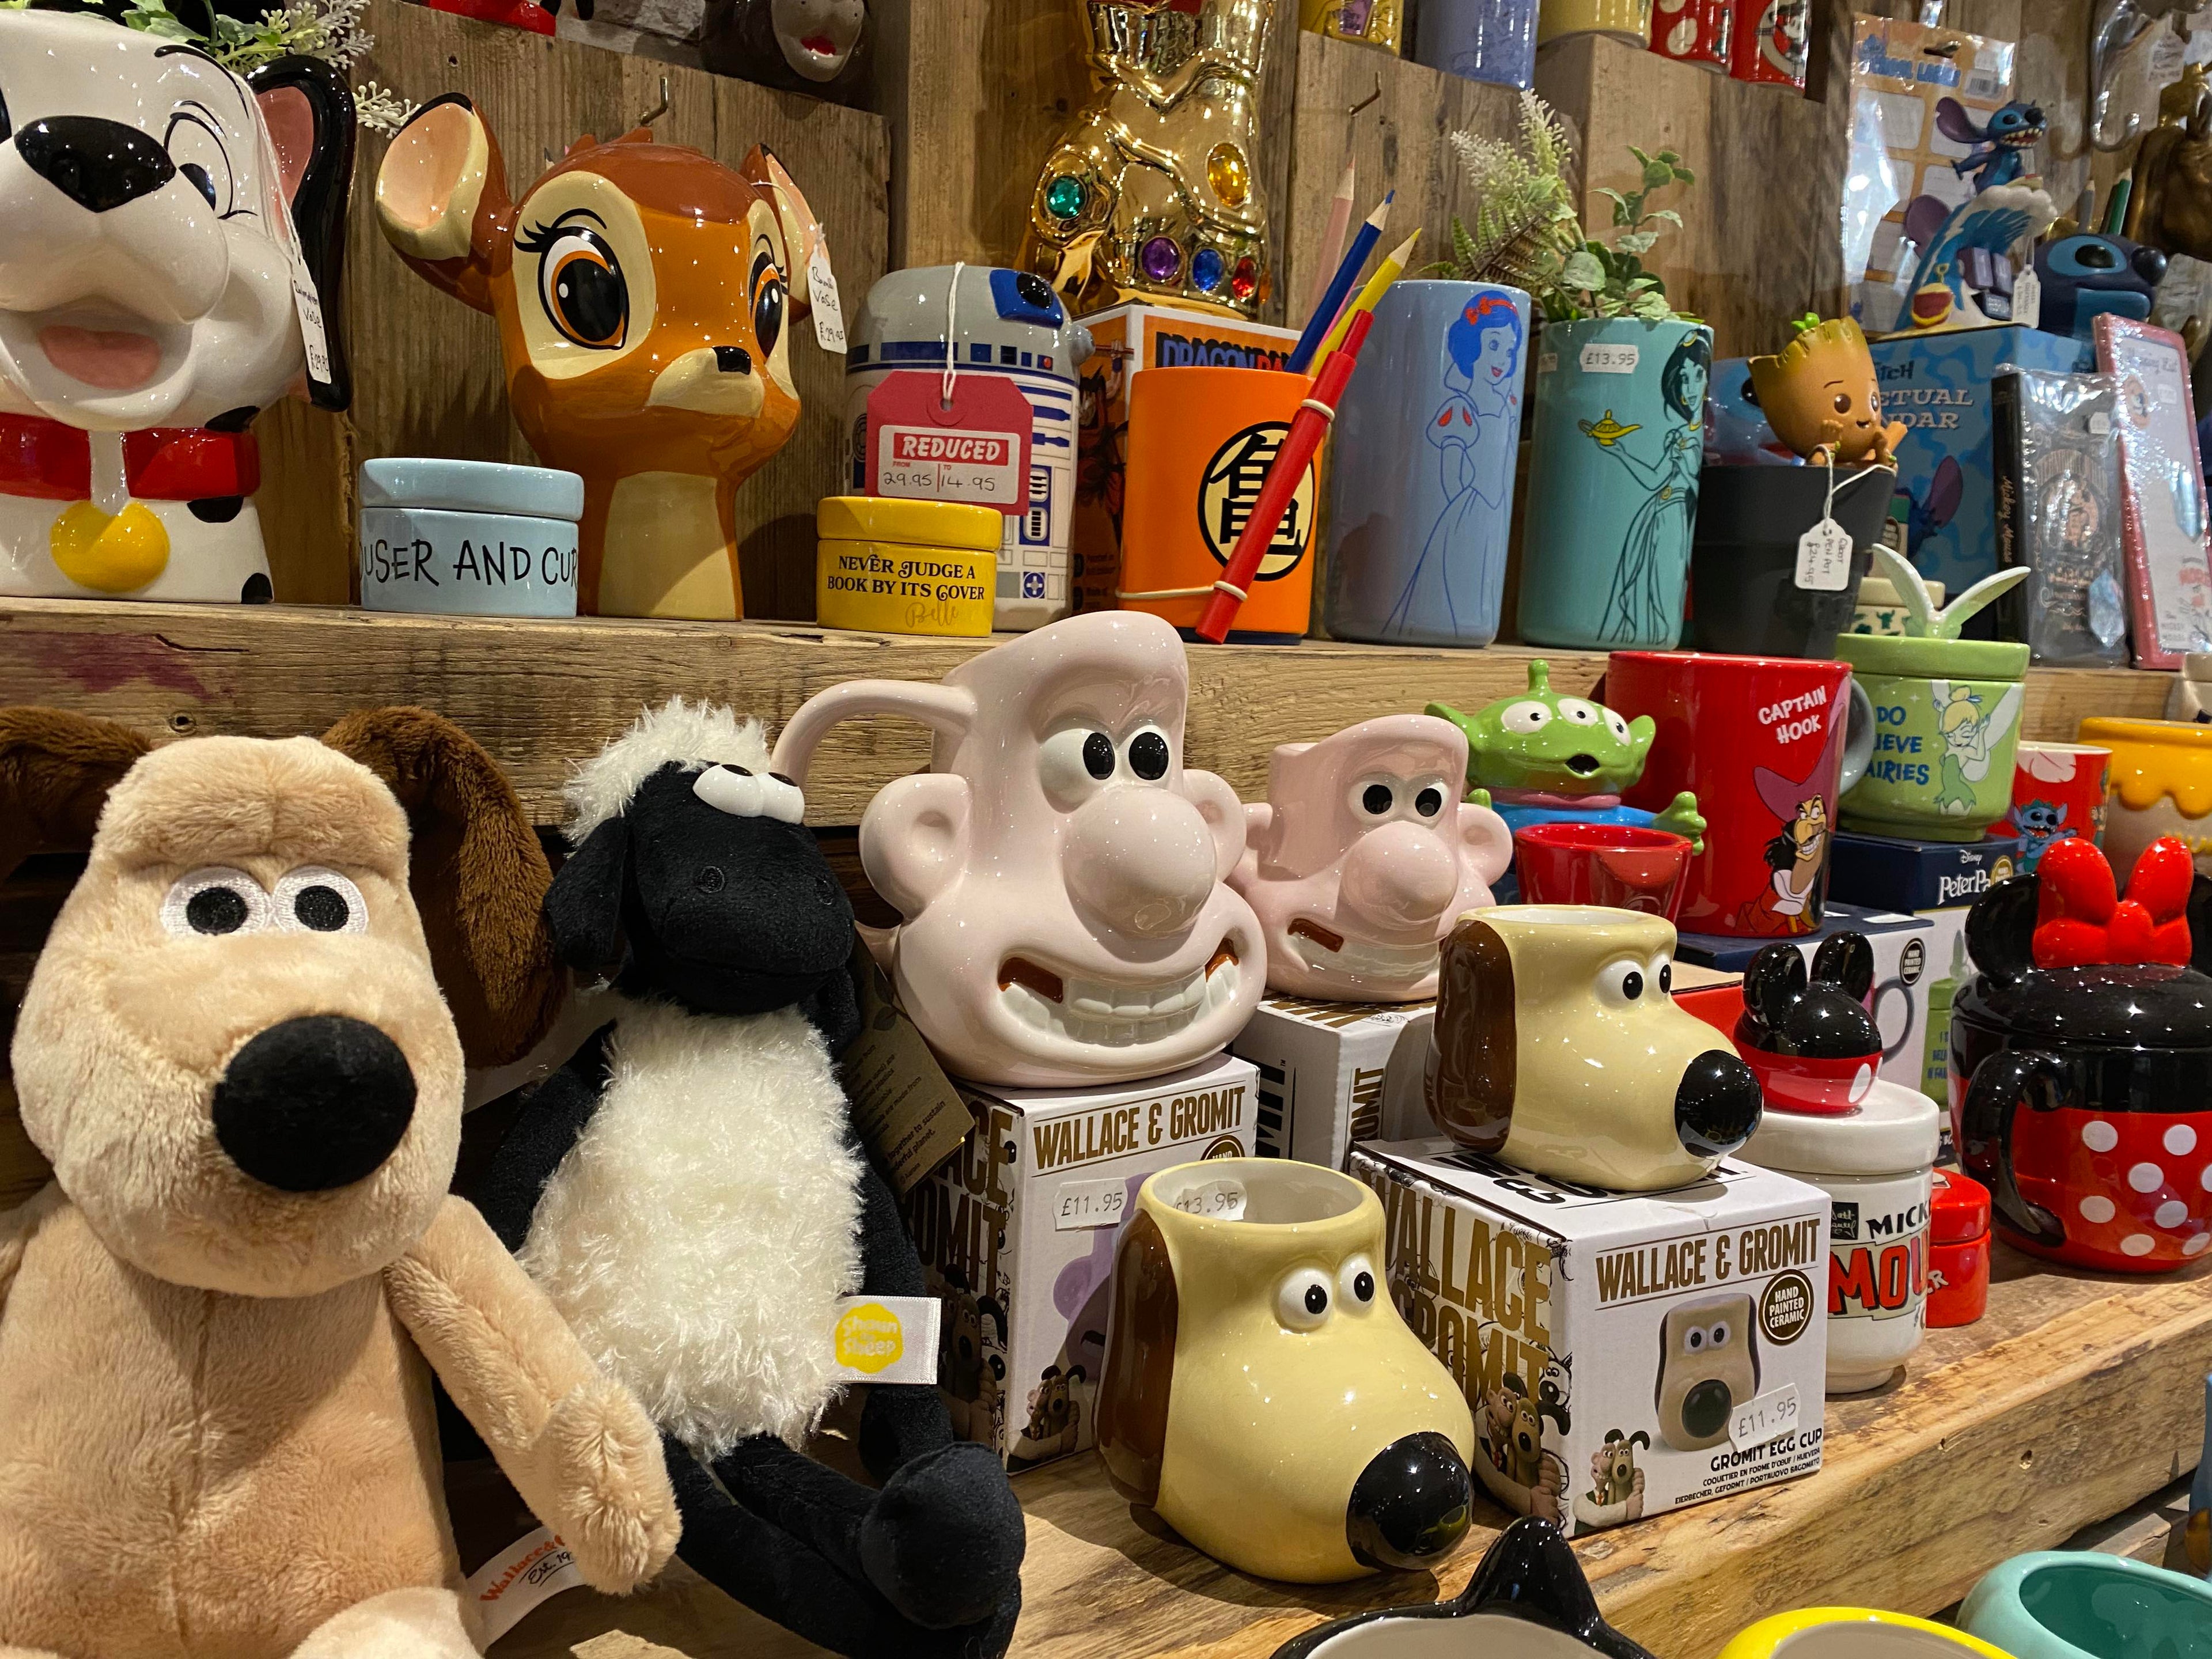 One of the shelves at Happy Piranha store featuring a selection of Disney and Wallace & Gromit merchandise.